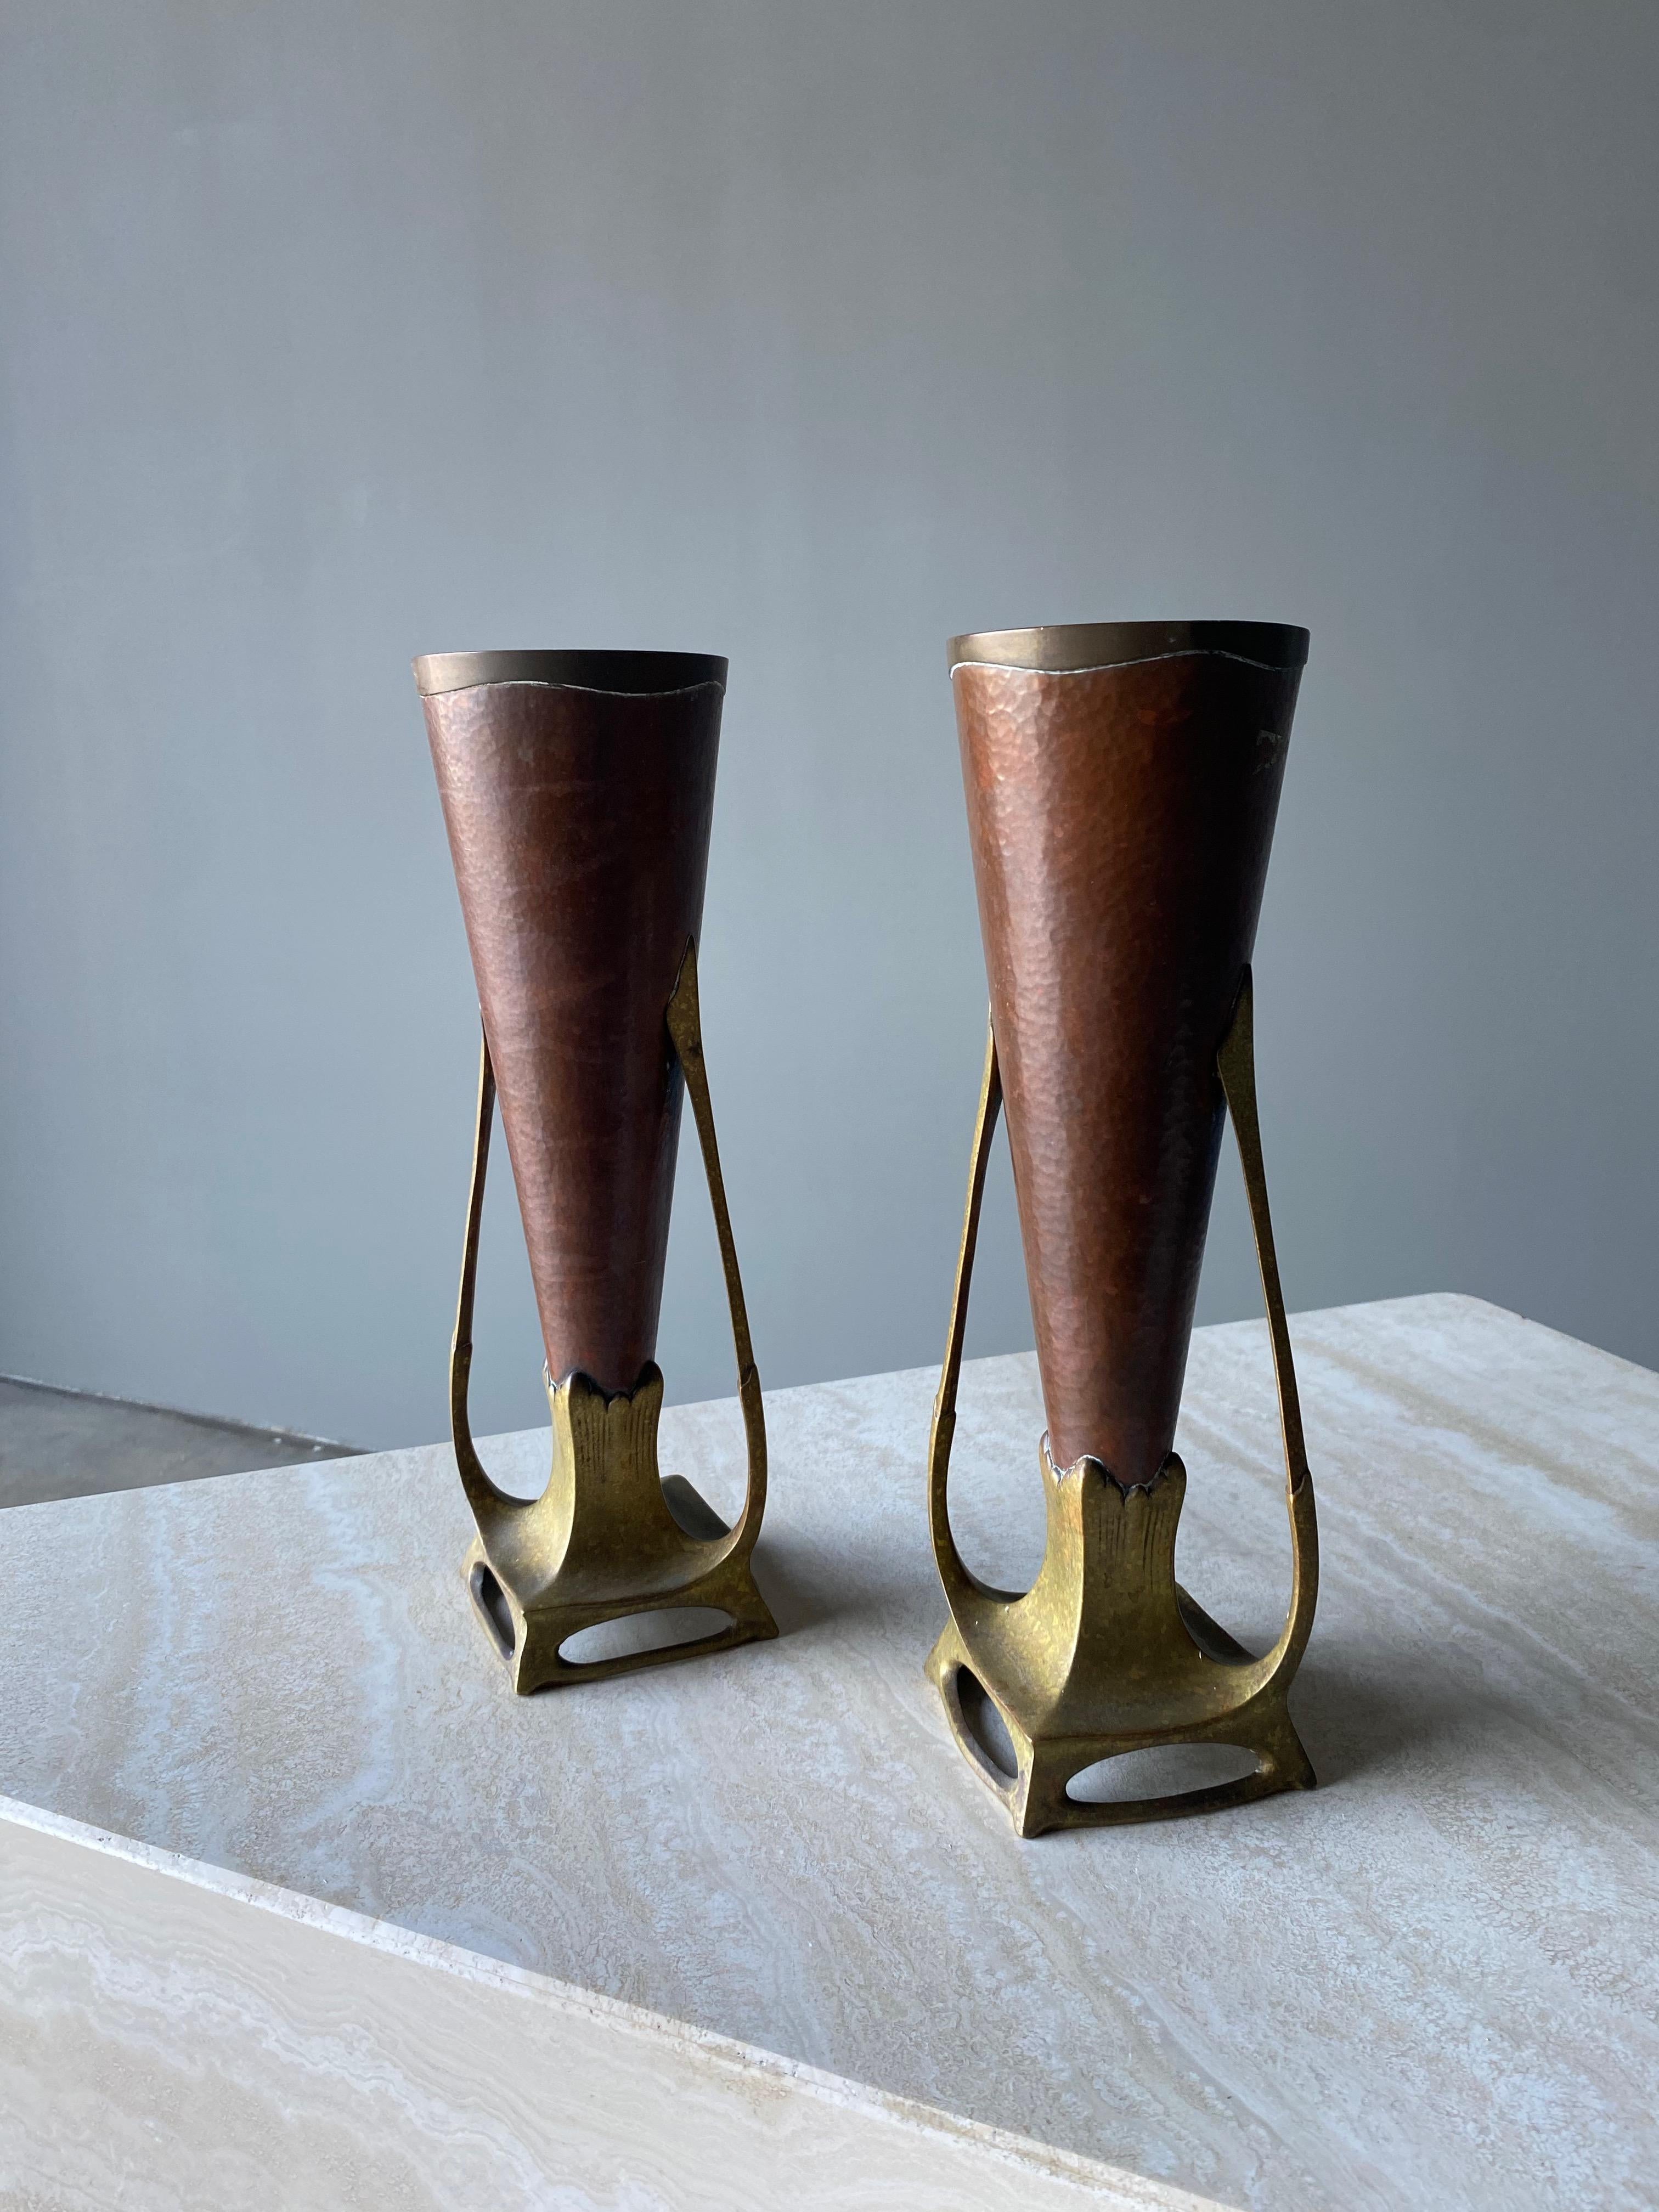 Carl Deffner Pair of Hammered Copper & Cast Bronze Vases, Germany, circa 1900 In Good Condition For Sale In Costa Mesa, CA